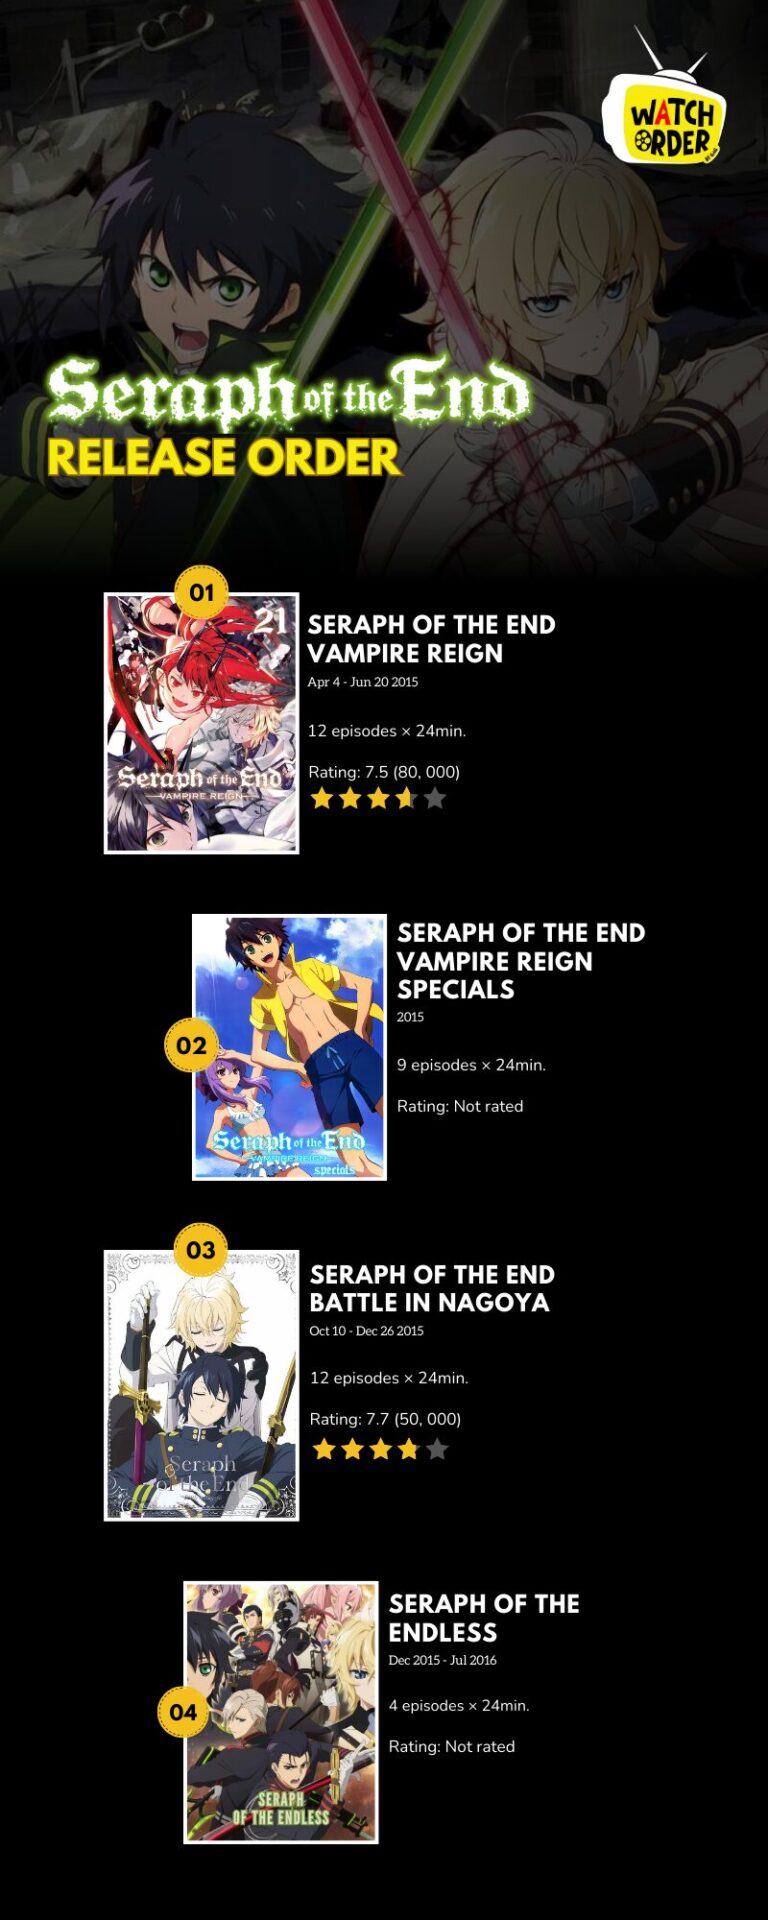 Seraph of the End Release Order Infographic